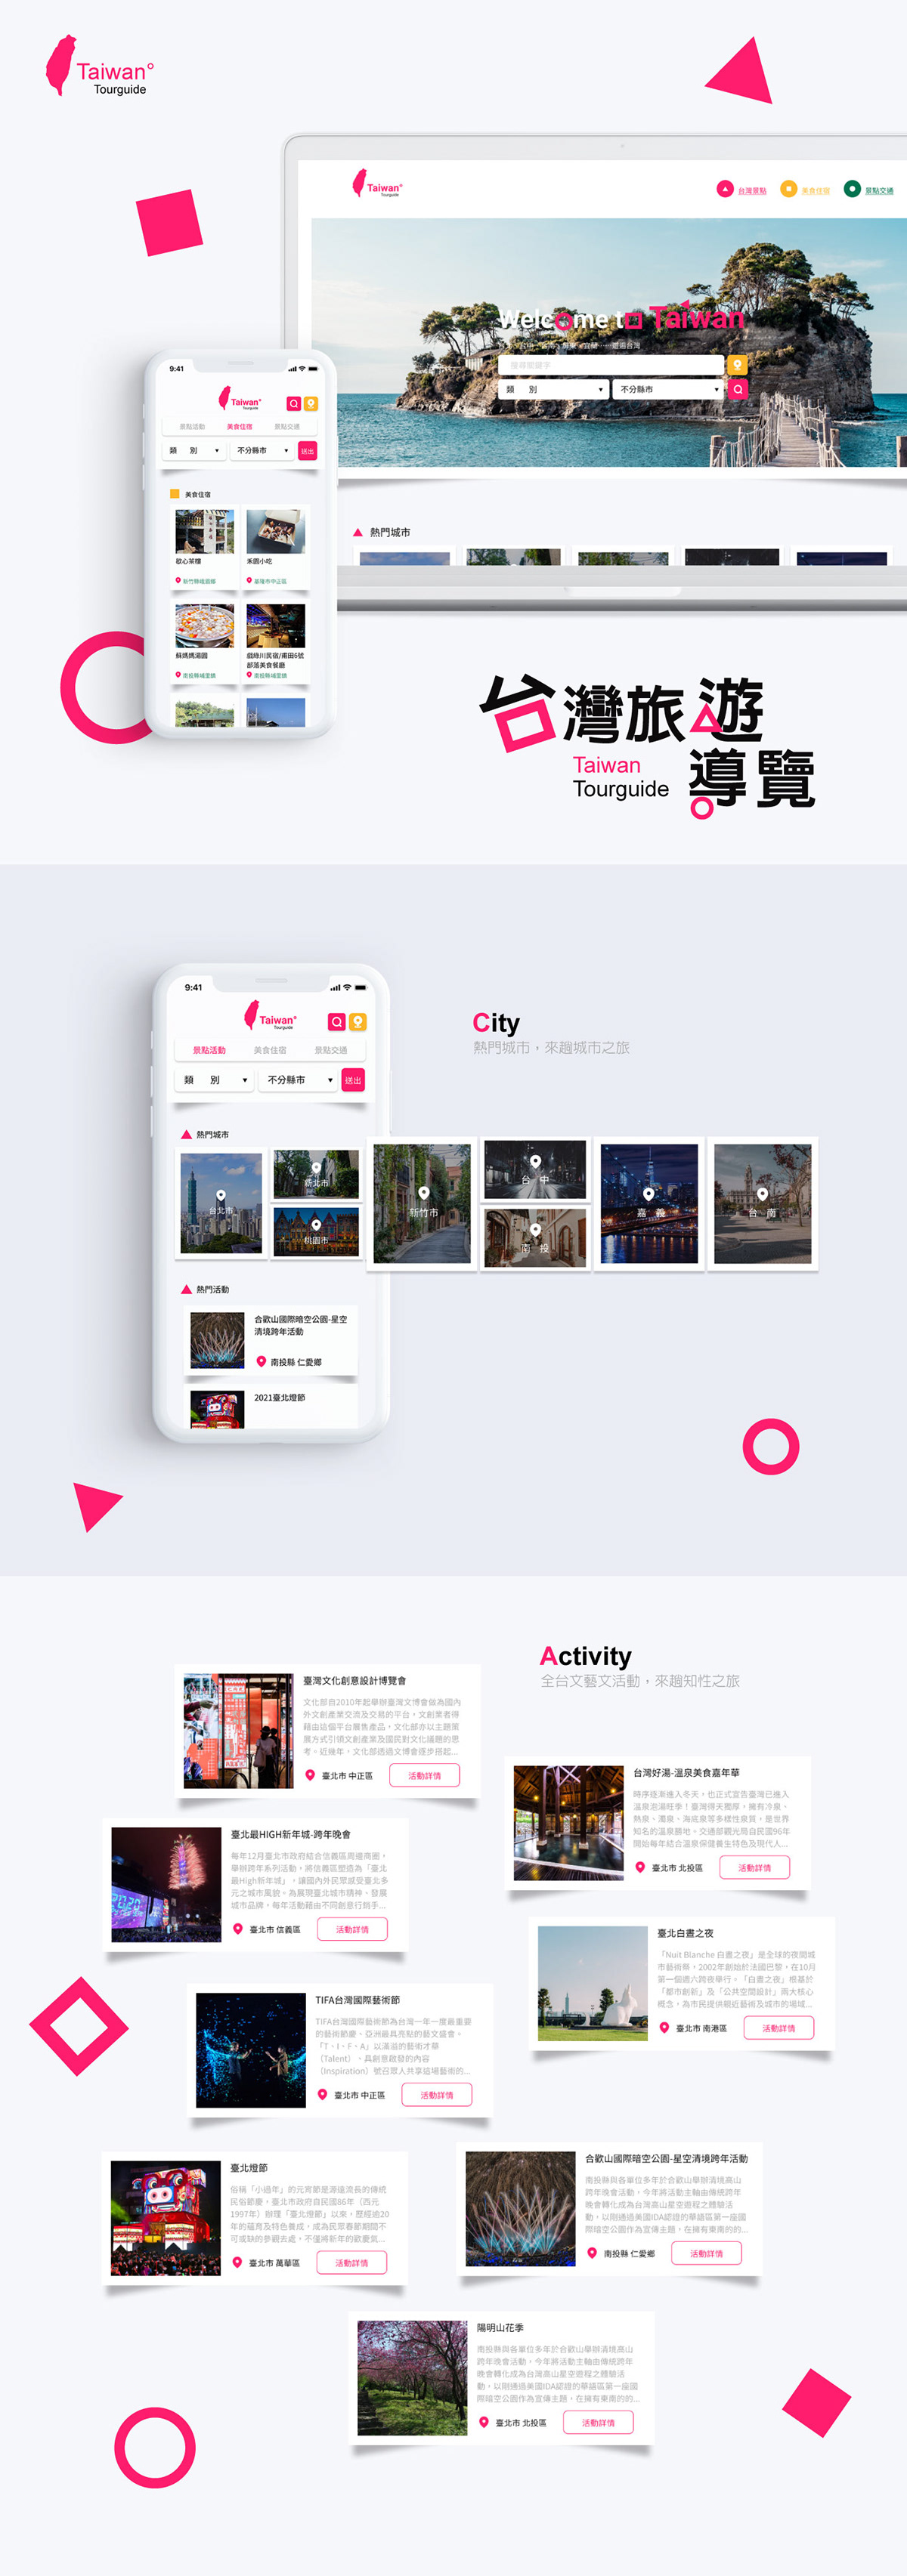 activity city taiwan tourguide Travel 台灣 旅遊 UI ui ux